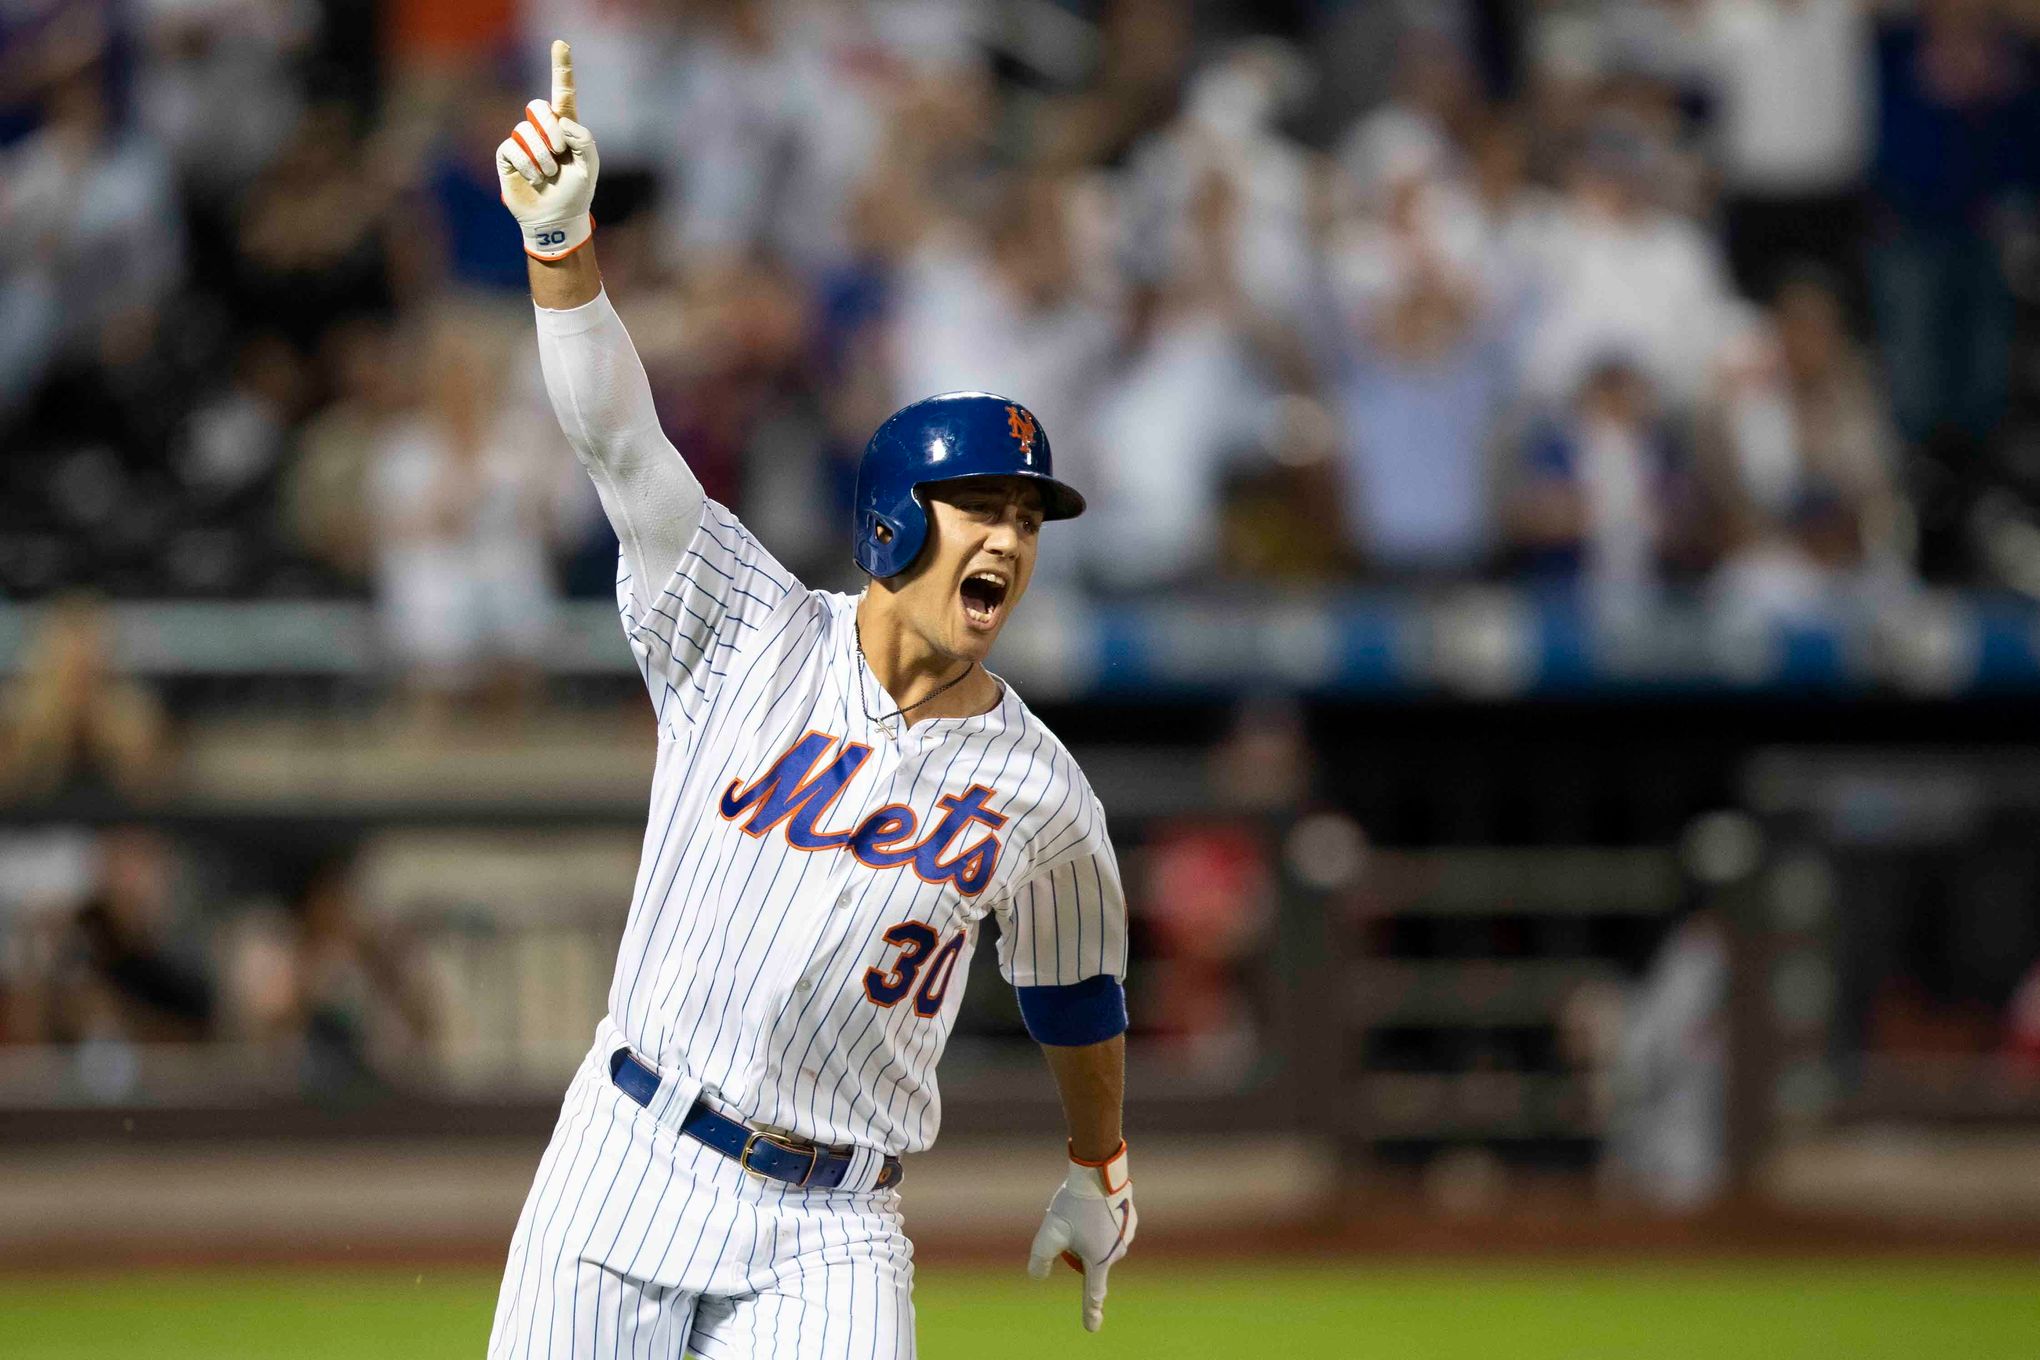 Pete Alonso homers twice to help Mets beat Nationals 5-1 - Washington Times